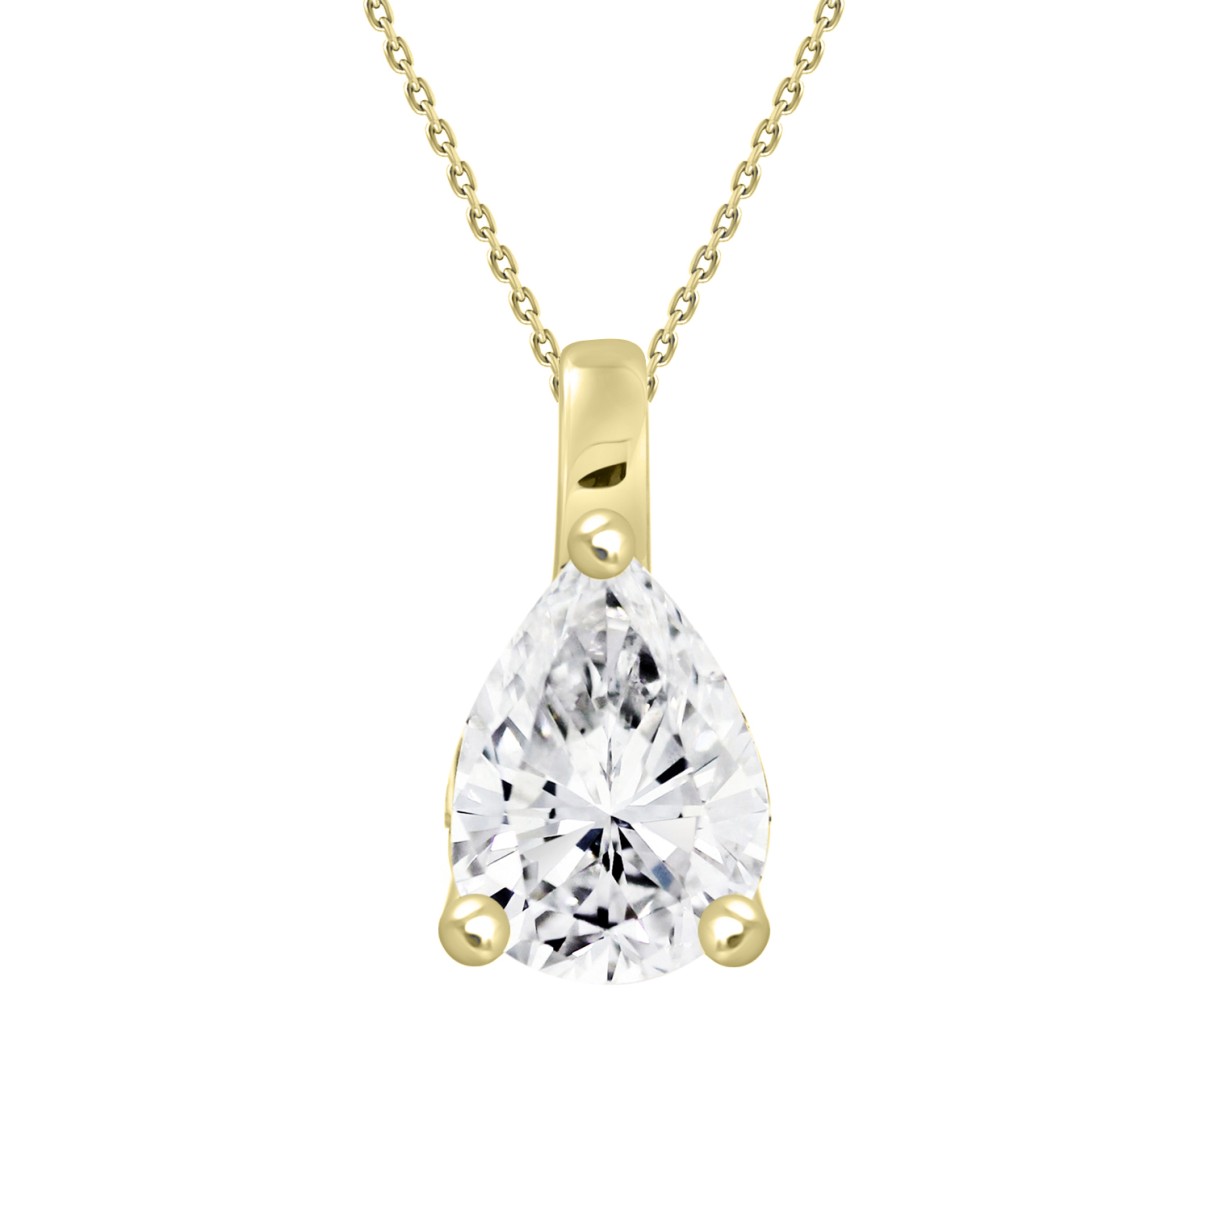 LADIES SOLITAIRE PENDANT WITH CHAIN 1 1/2CT PEAR DIAMOND 14K YELLOW GOLD